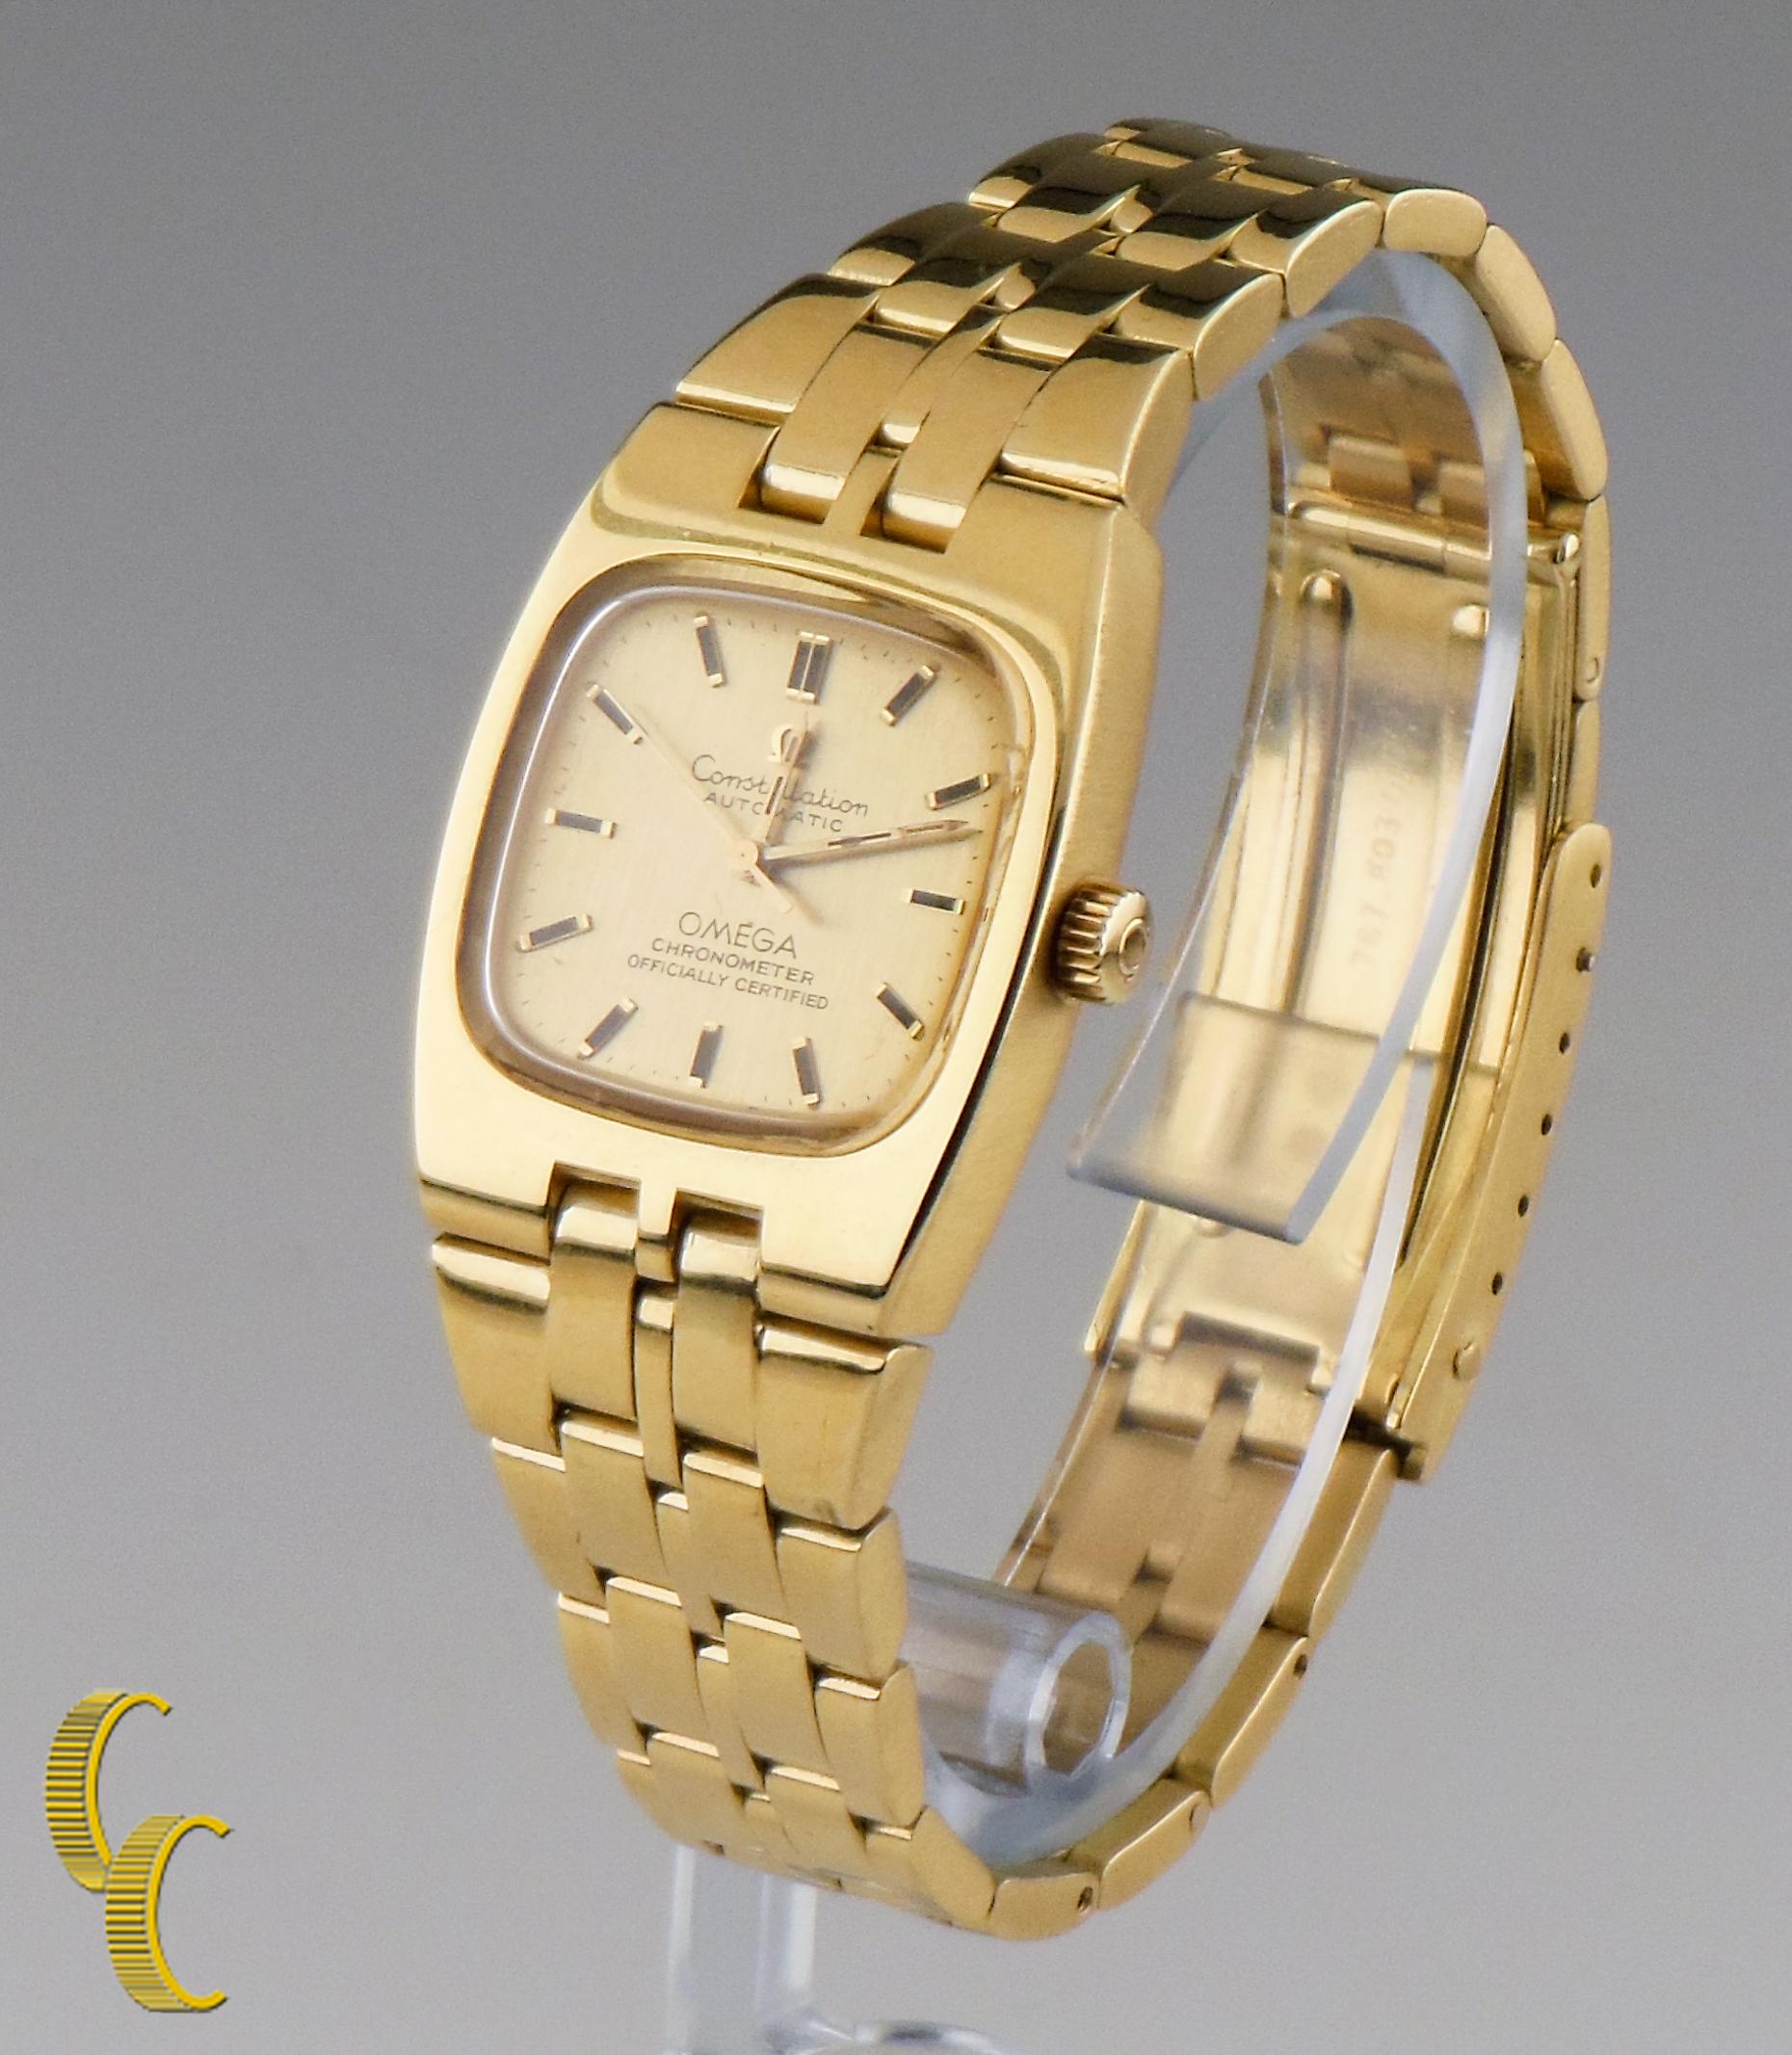 Model: Constellation Chronometer
Model #672-27889870
Serial #567-012-767.803
18k Yellow Gold Case
25 mm Wide (27 mm w/ Crown)
Lug-to-Lug Distance = 30 mm
Case Thickness = 8 mm
Gold Dial w/ Gold Tic Marks & Hands (S, M, H)

Dial= 20 mm Wide
Dial= 20